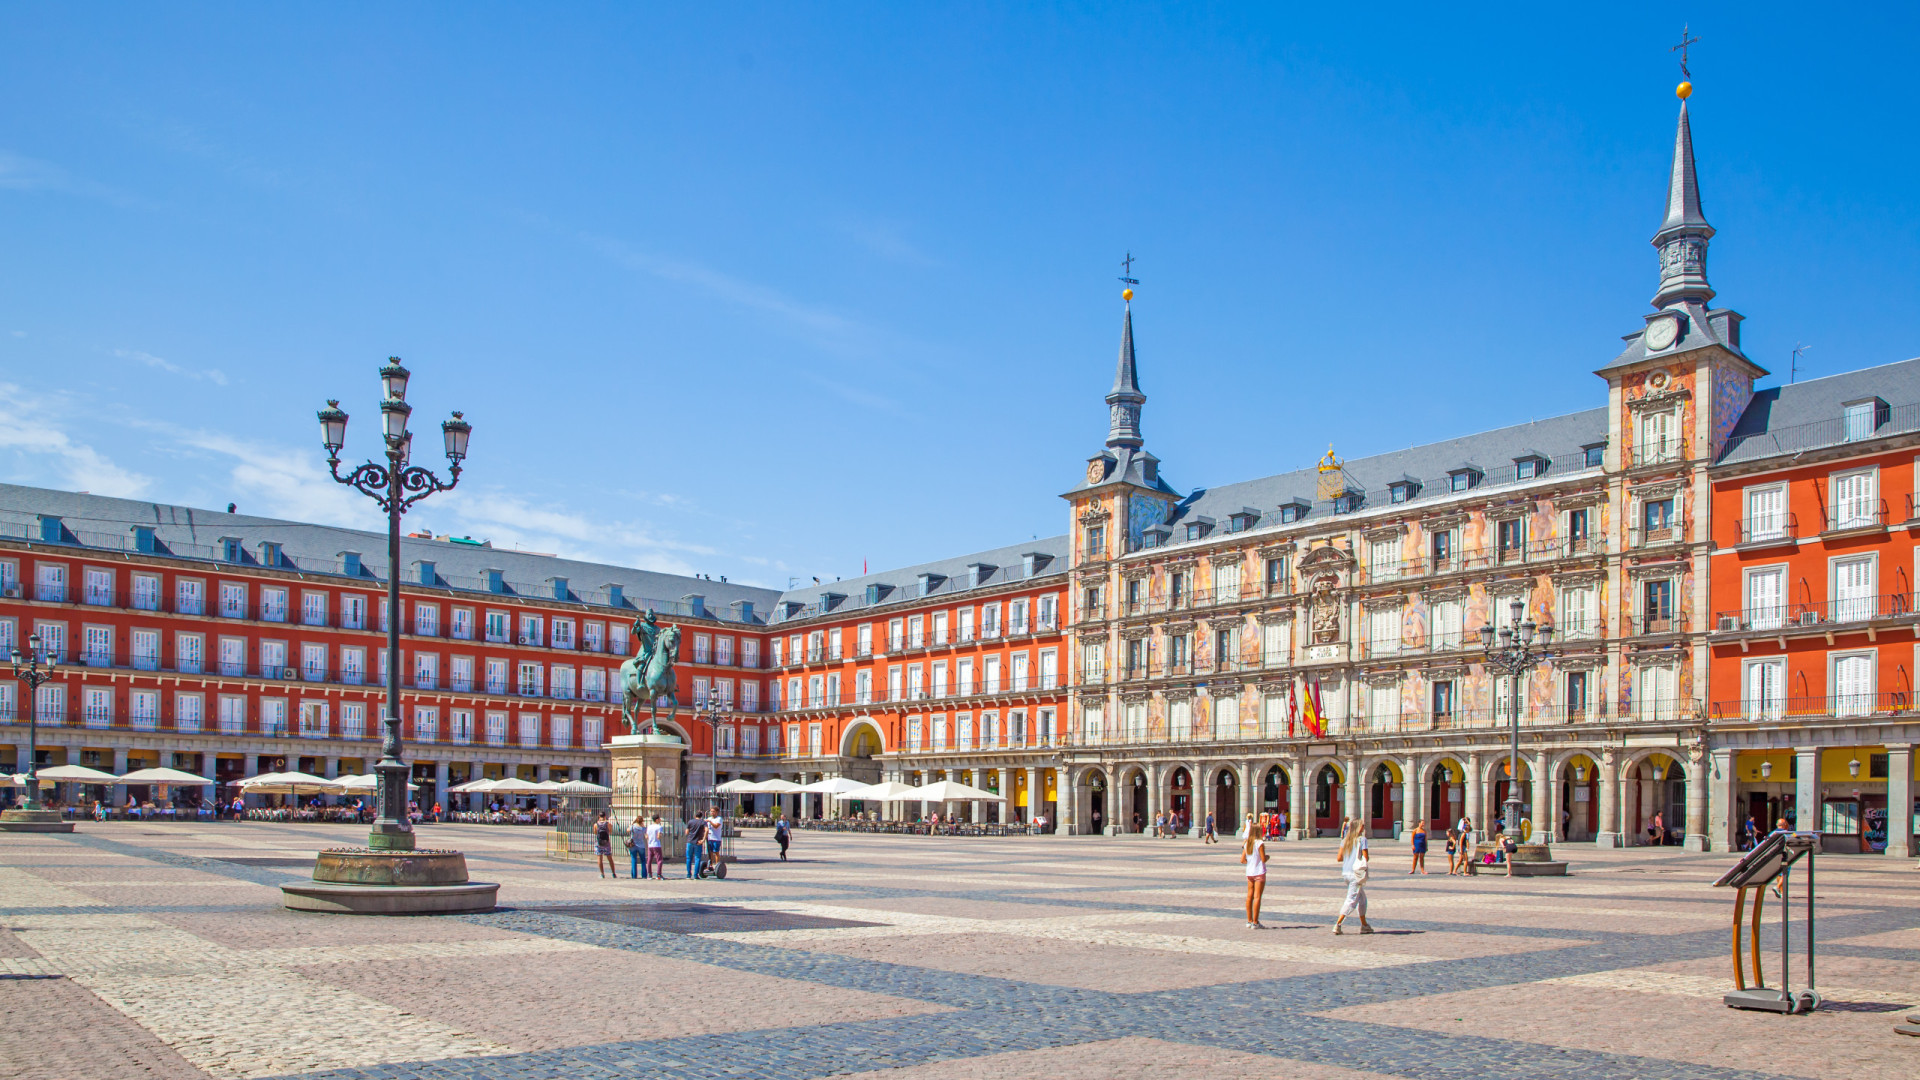 <p>If you're visiting Madrid, be wary when visiting the Plaza Mayor, as thieves often target this famous public square.</p><p><a href="https://www.msn.com/en-us/community/channel/vid-7xx8mnucu55yw63we9va2gwr7uihbxwc68fxqp25x6tg4ftibpra?cvid=94631541bc0f4f89bfd59158d696ad7e">Follow us and access great exclusive content every day</a></p>